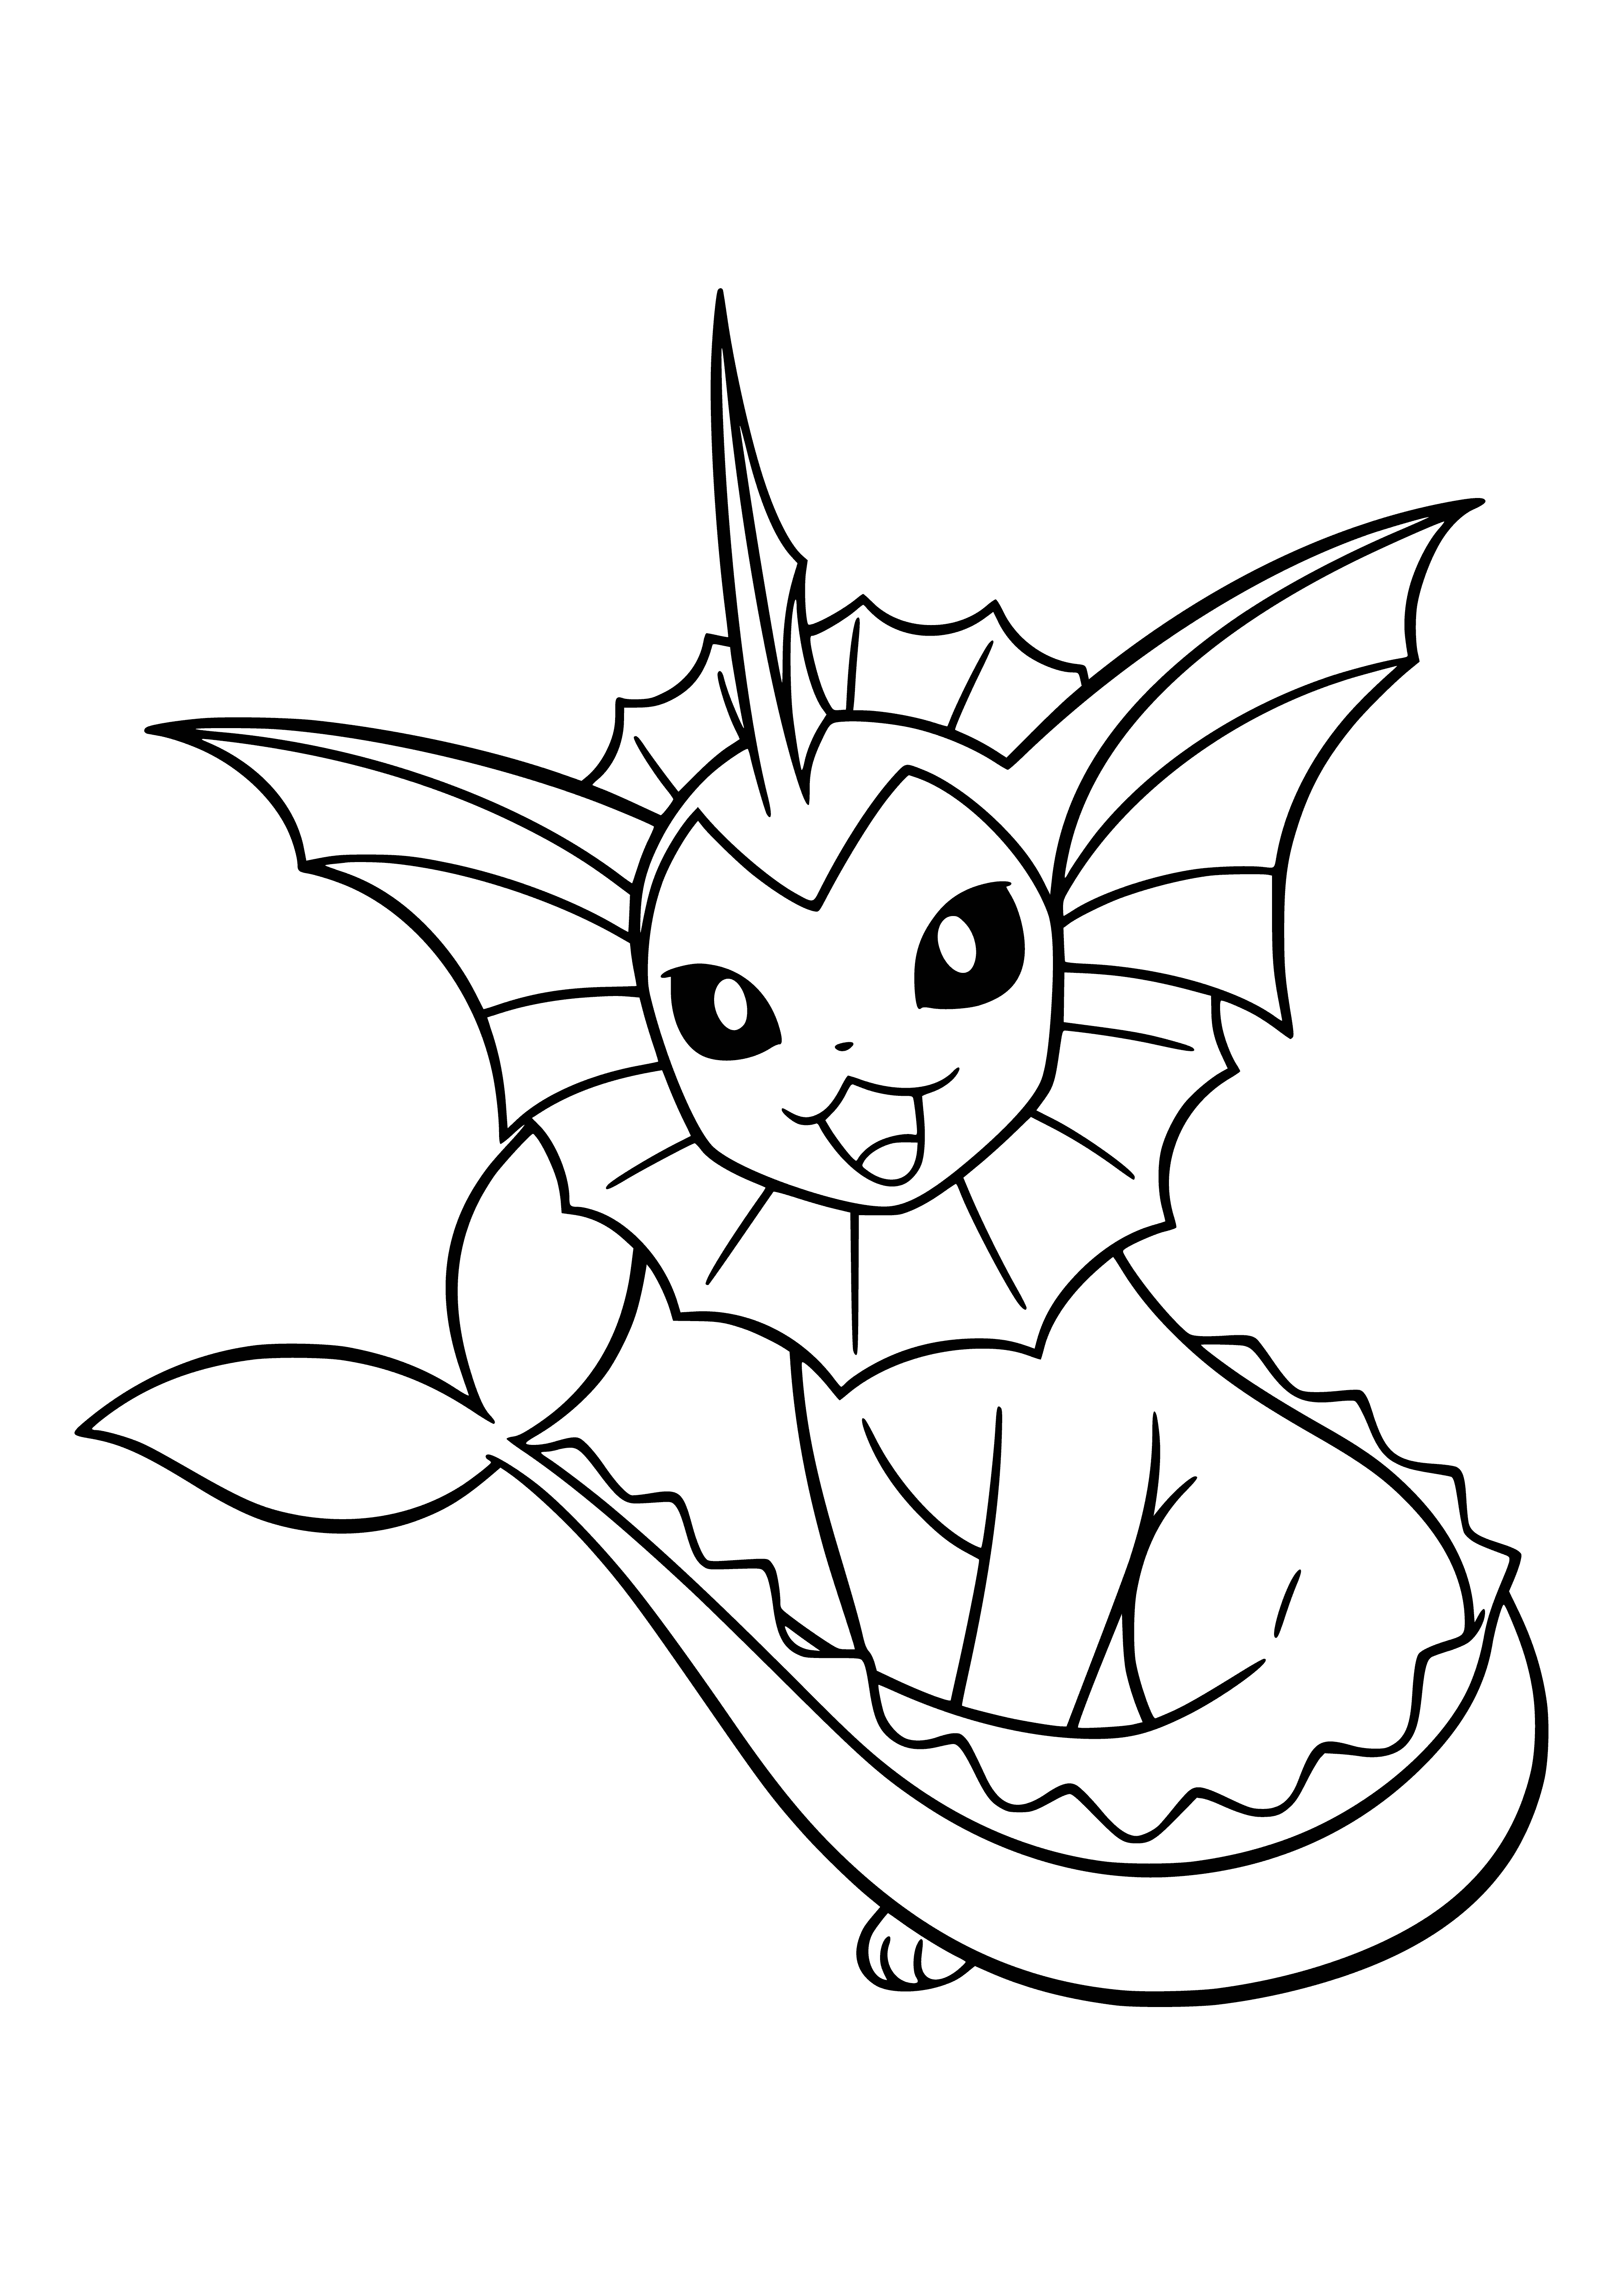 coloring page: Vaporeon is a blue water Pokemon. Slim body, round head & long ears, two black fins on back & two thin fins on sides.